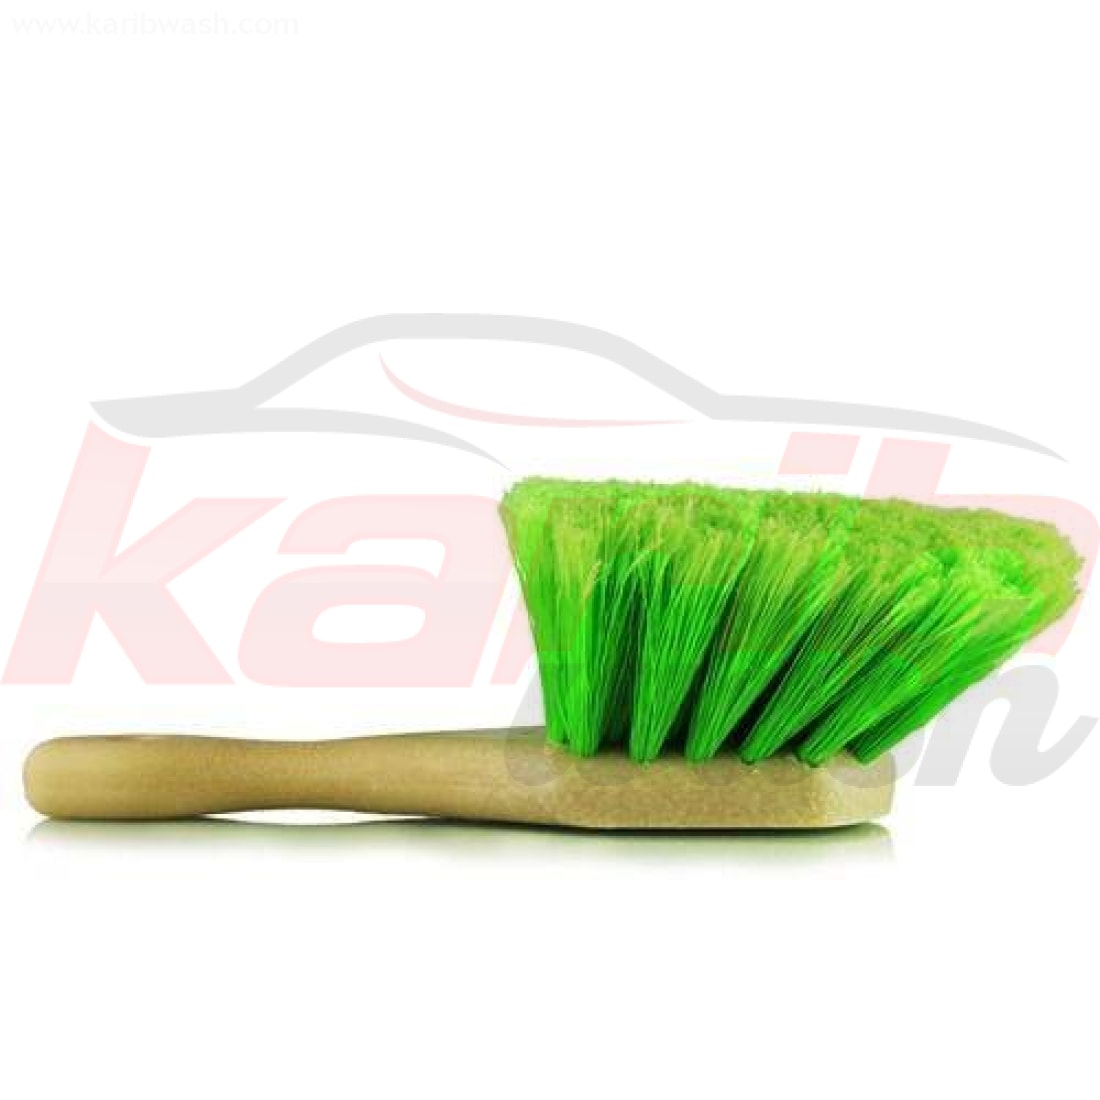 Tire/Wheel Brush- Heavy Cleaning With Gentle Feathered Bristles Short Handle Green Bristles - CHEMICAL GUYS - KARIBWASH